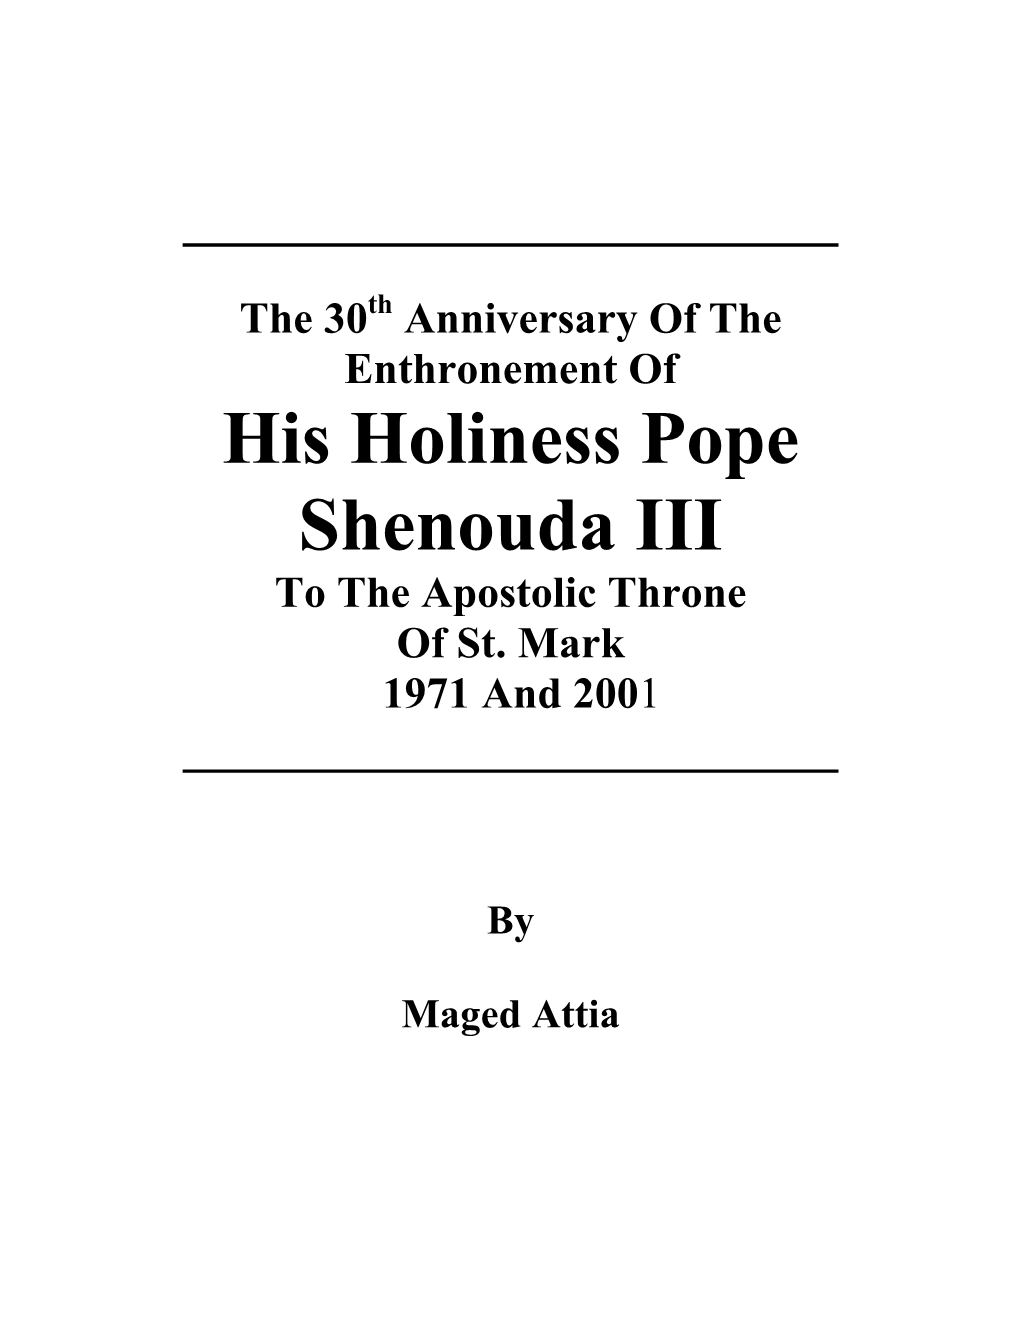 The 30Th Anniversary of the Enthronement of His Holiness Pope Shenouda III to the Apostolic Throne of St